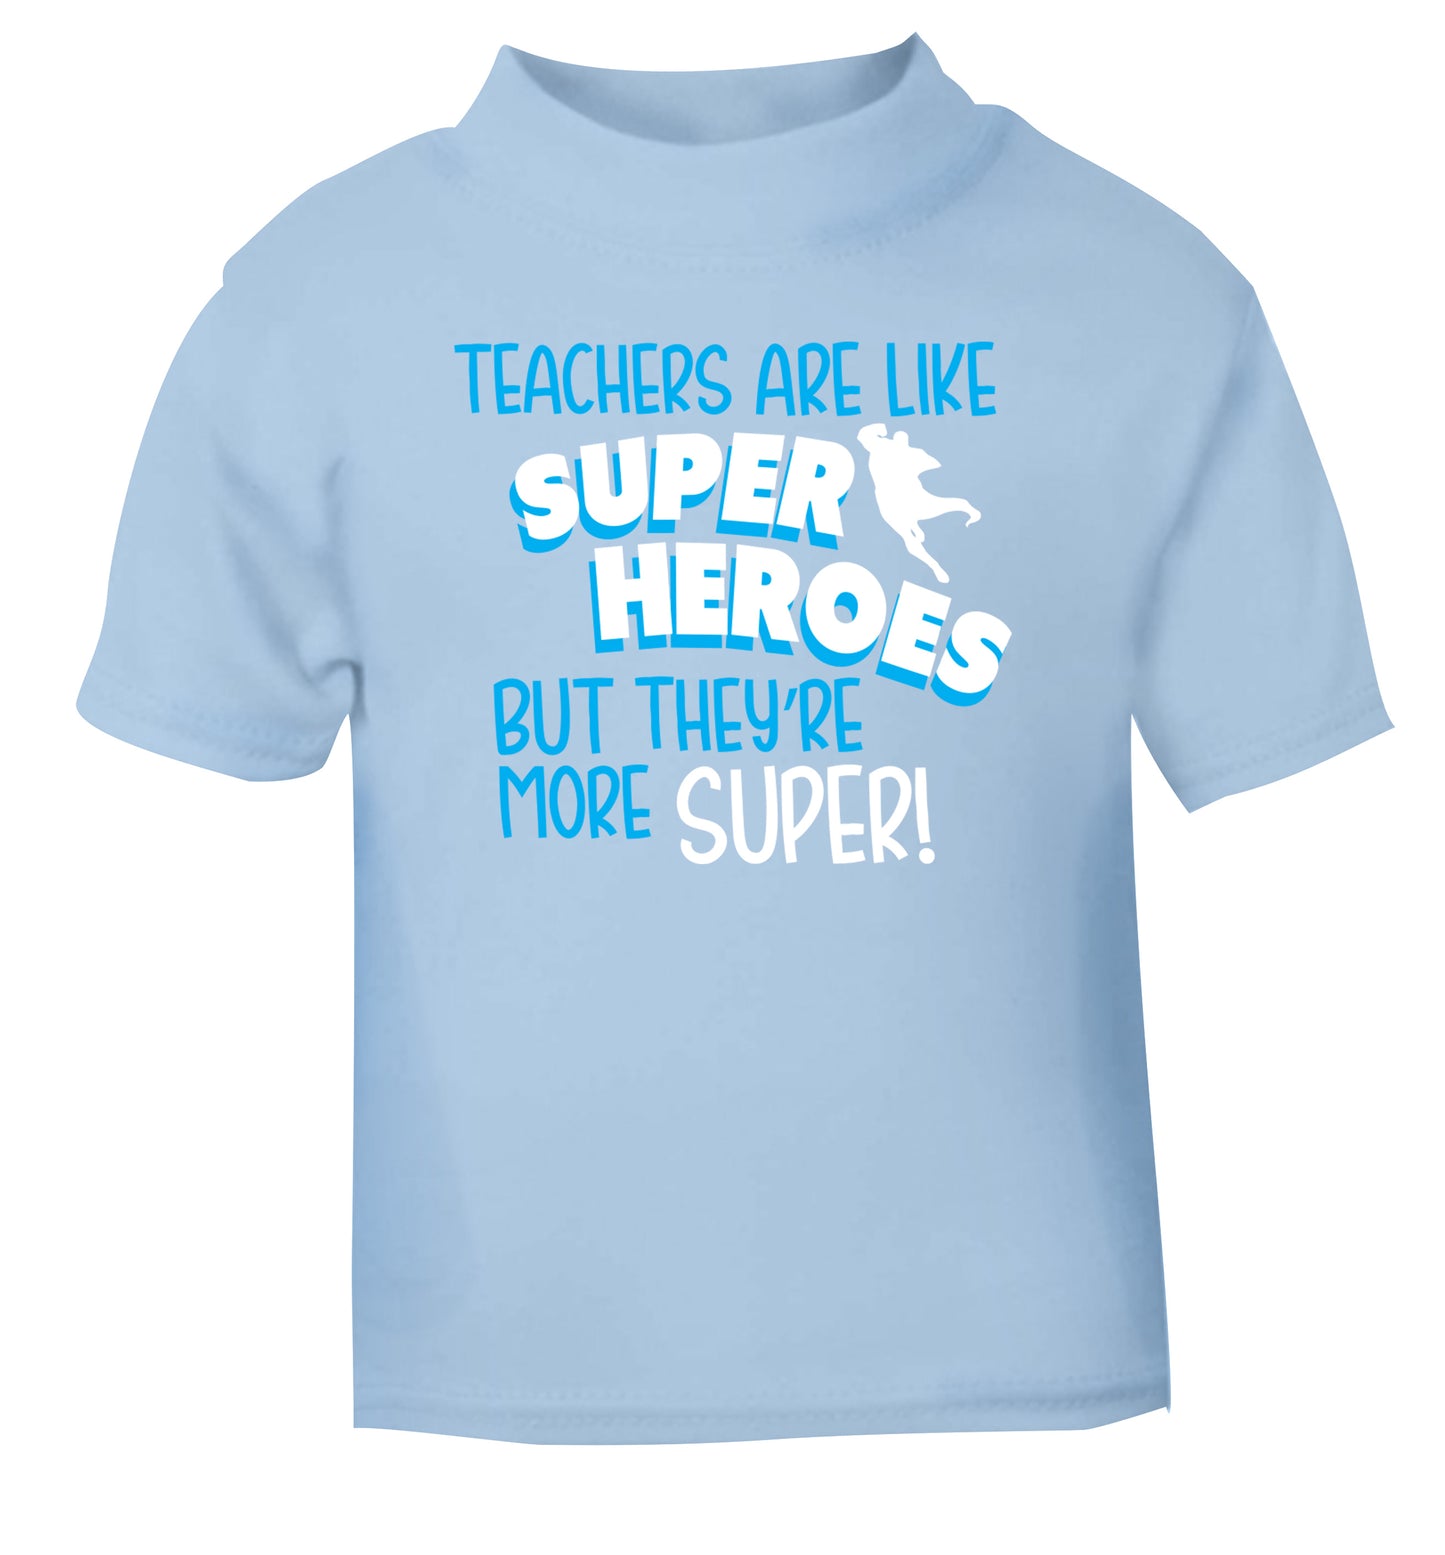 Teachers are like superheros but they're more super light blue Baby Toddler Tshirt 2 Years